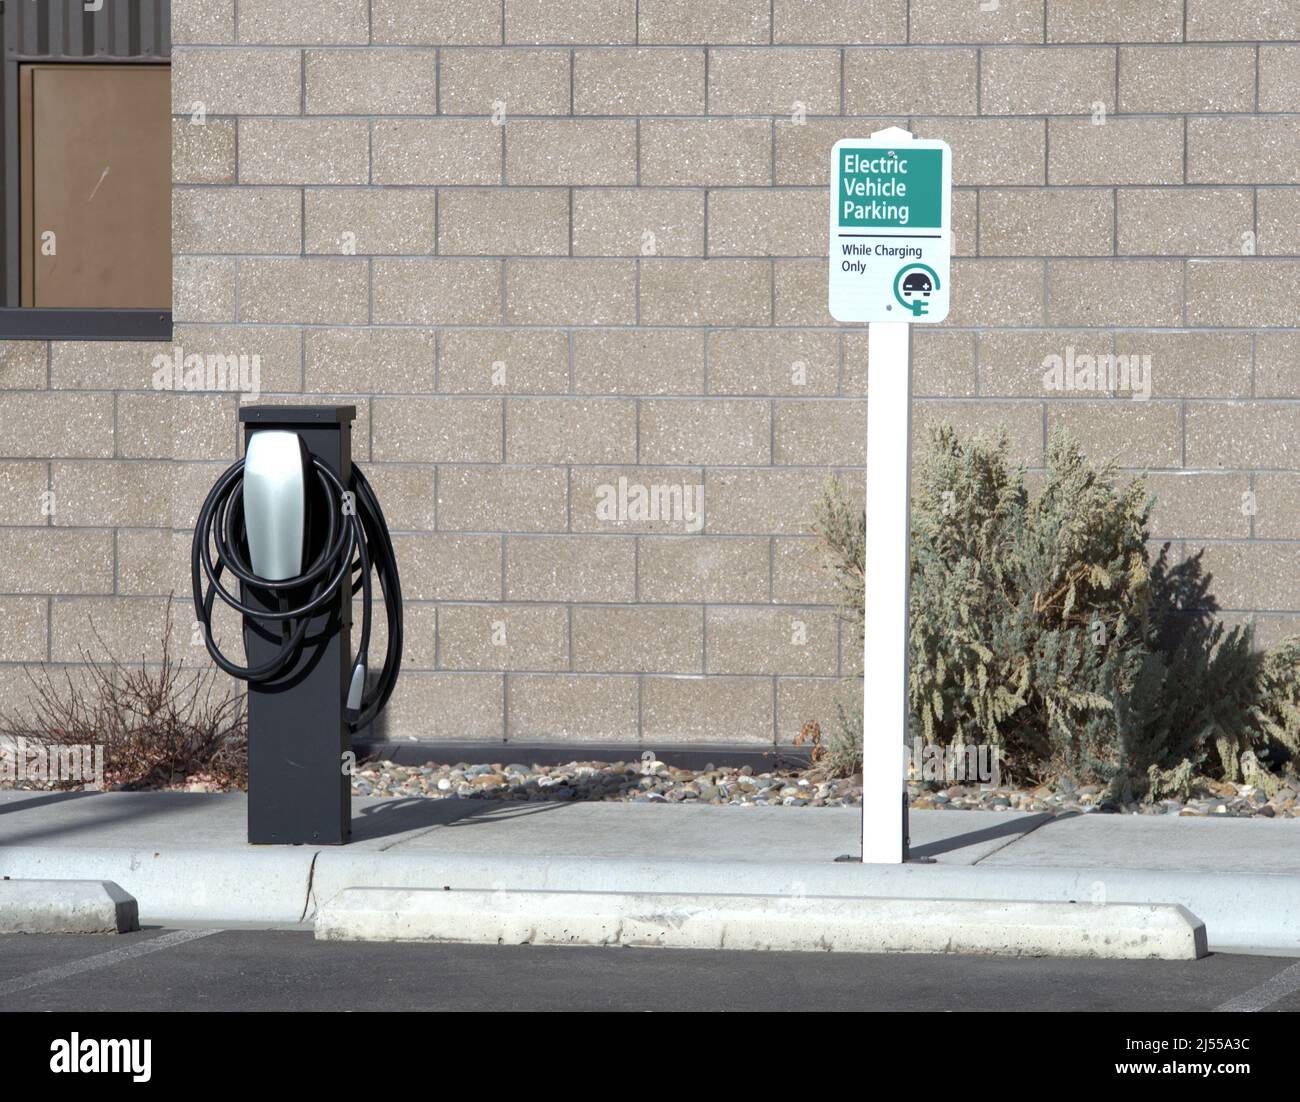 EV Charging station with limited parking sign Stock Photo